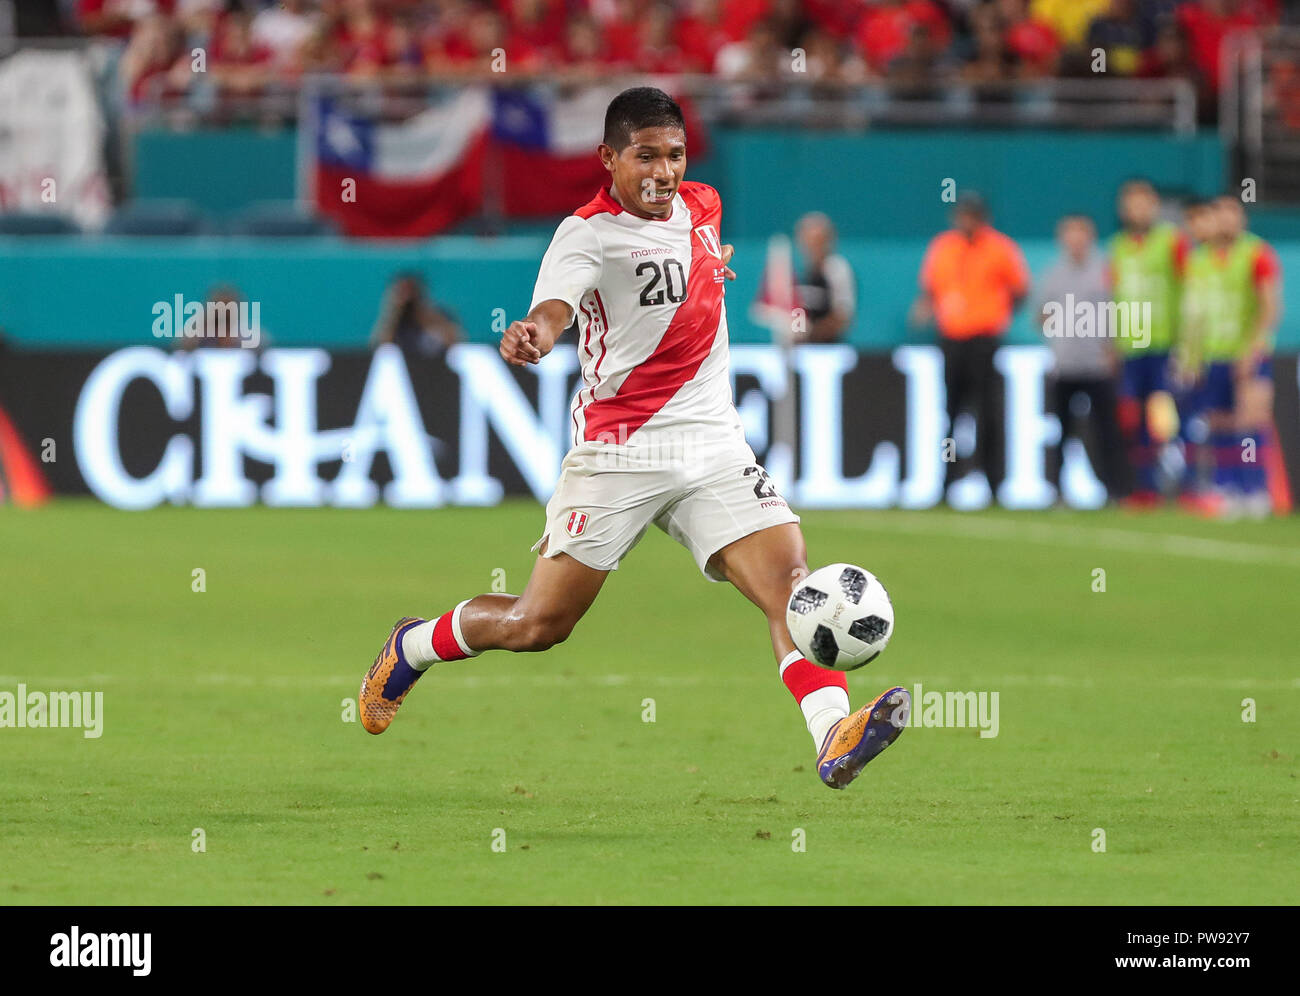 Miami Gardens, Florida, USA. 12th Oct, 2018. Peru midfielder EDISON FLORES (20) drives the ball during an international friendly match between the Peru and Chile national soccer teams, at the Hard Rock Stadium in Miami Gardens, Florida. Credit: Mario Houben/ZUMA Wire/Alamy Live News Stock Photo